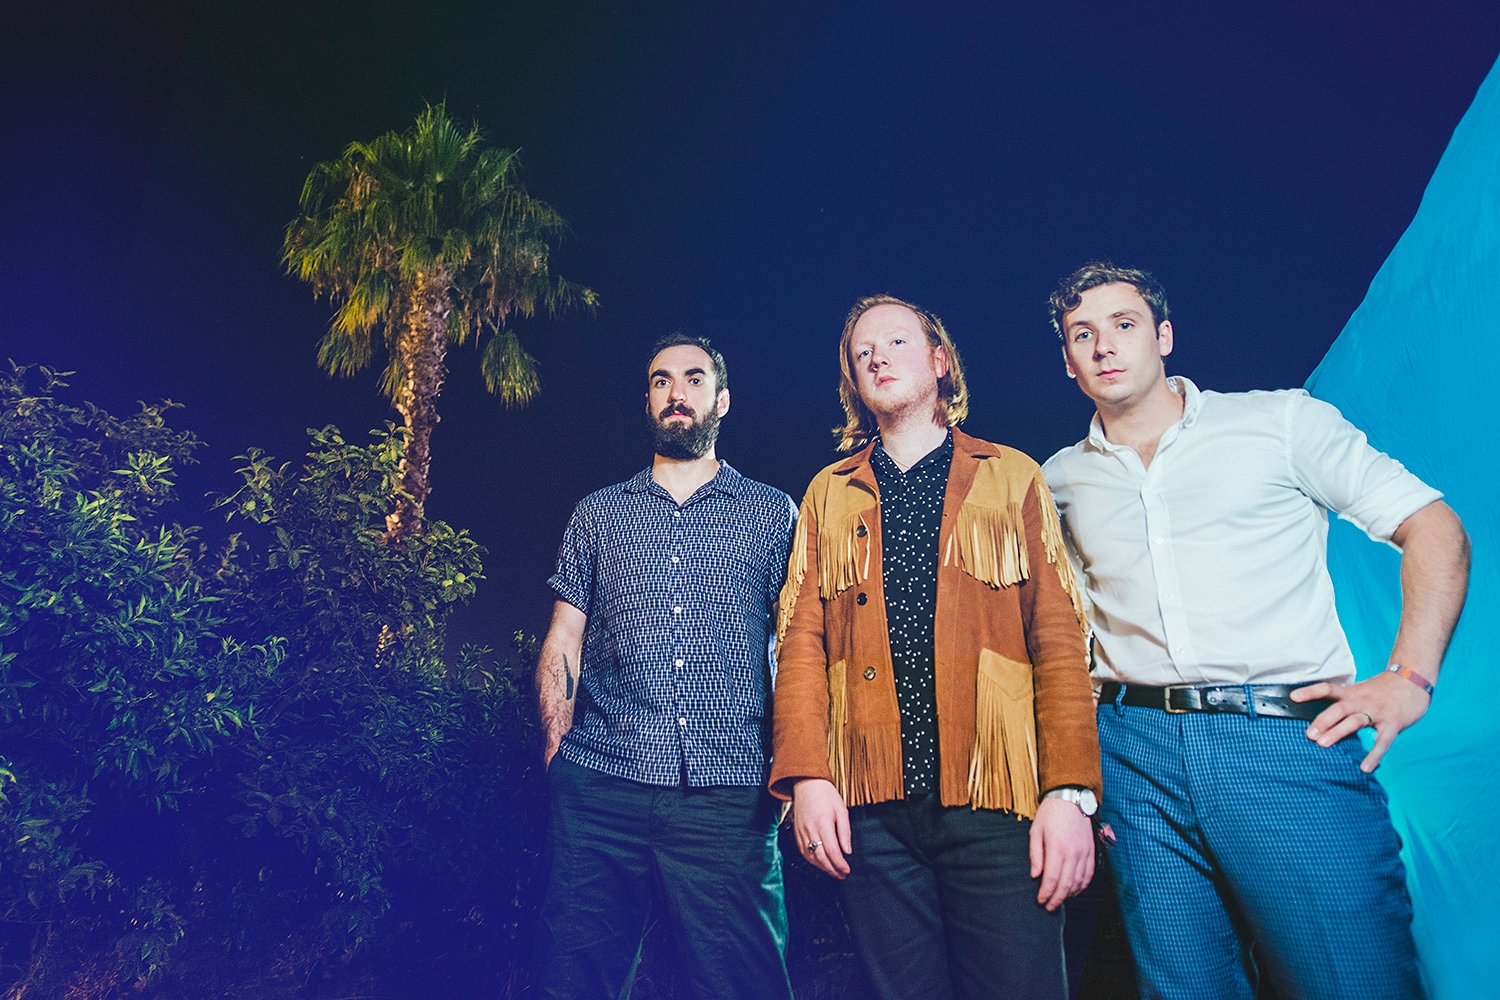 Two Door Cinema Club are taking ‘Gameshow’ on a UK tour